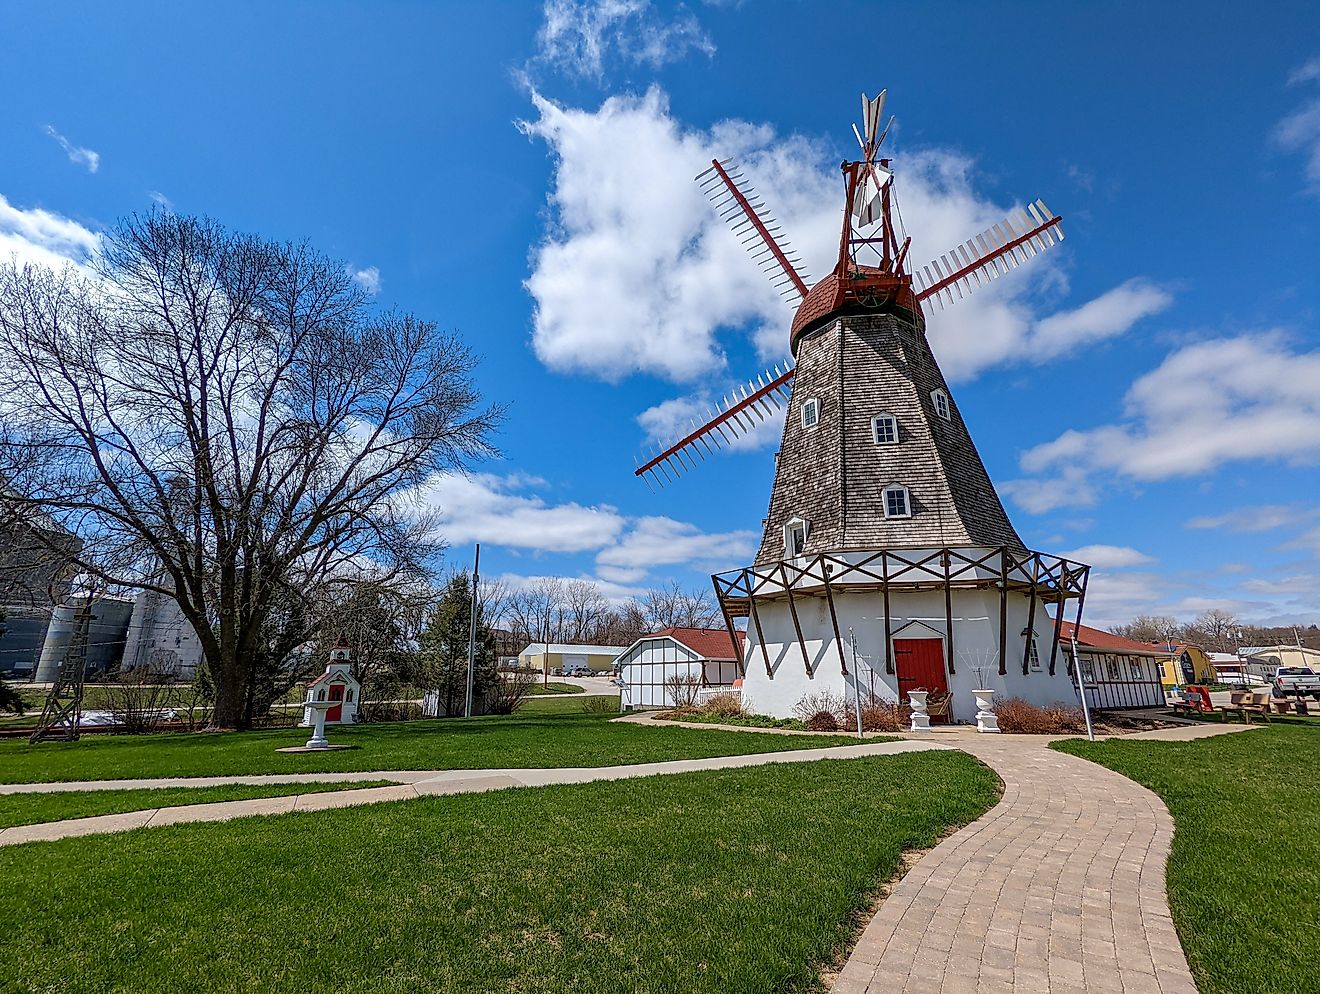 View of a rustic Danish windmill and walking path in the town of Elk Horn, Iowa.